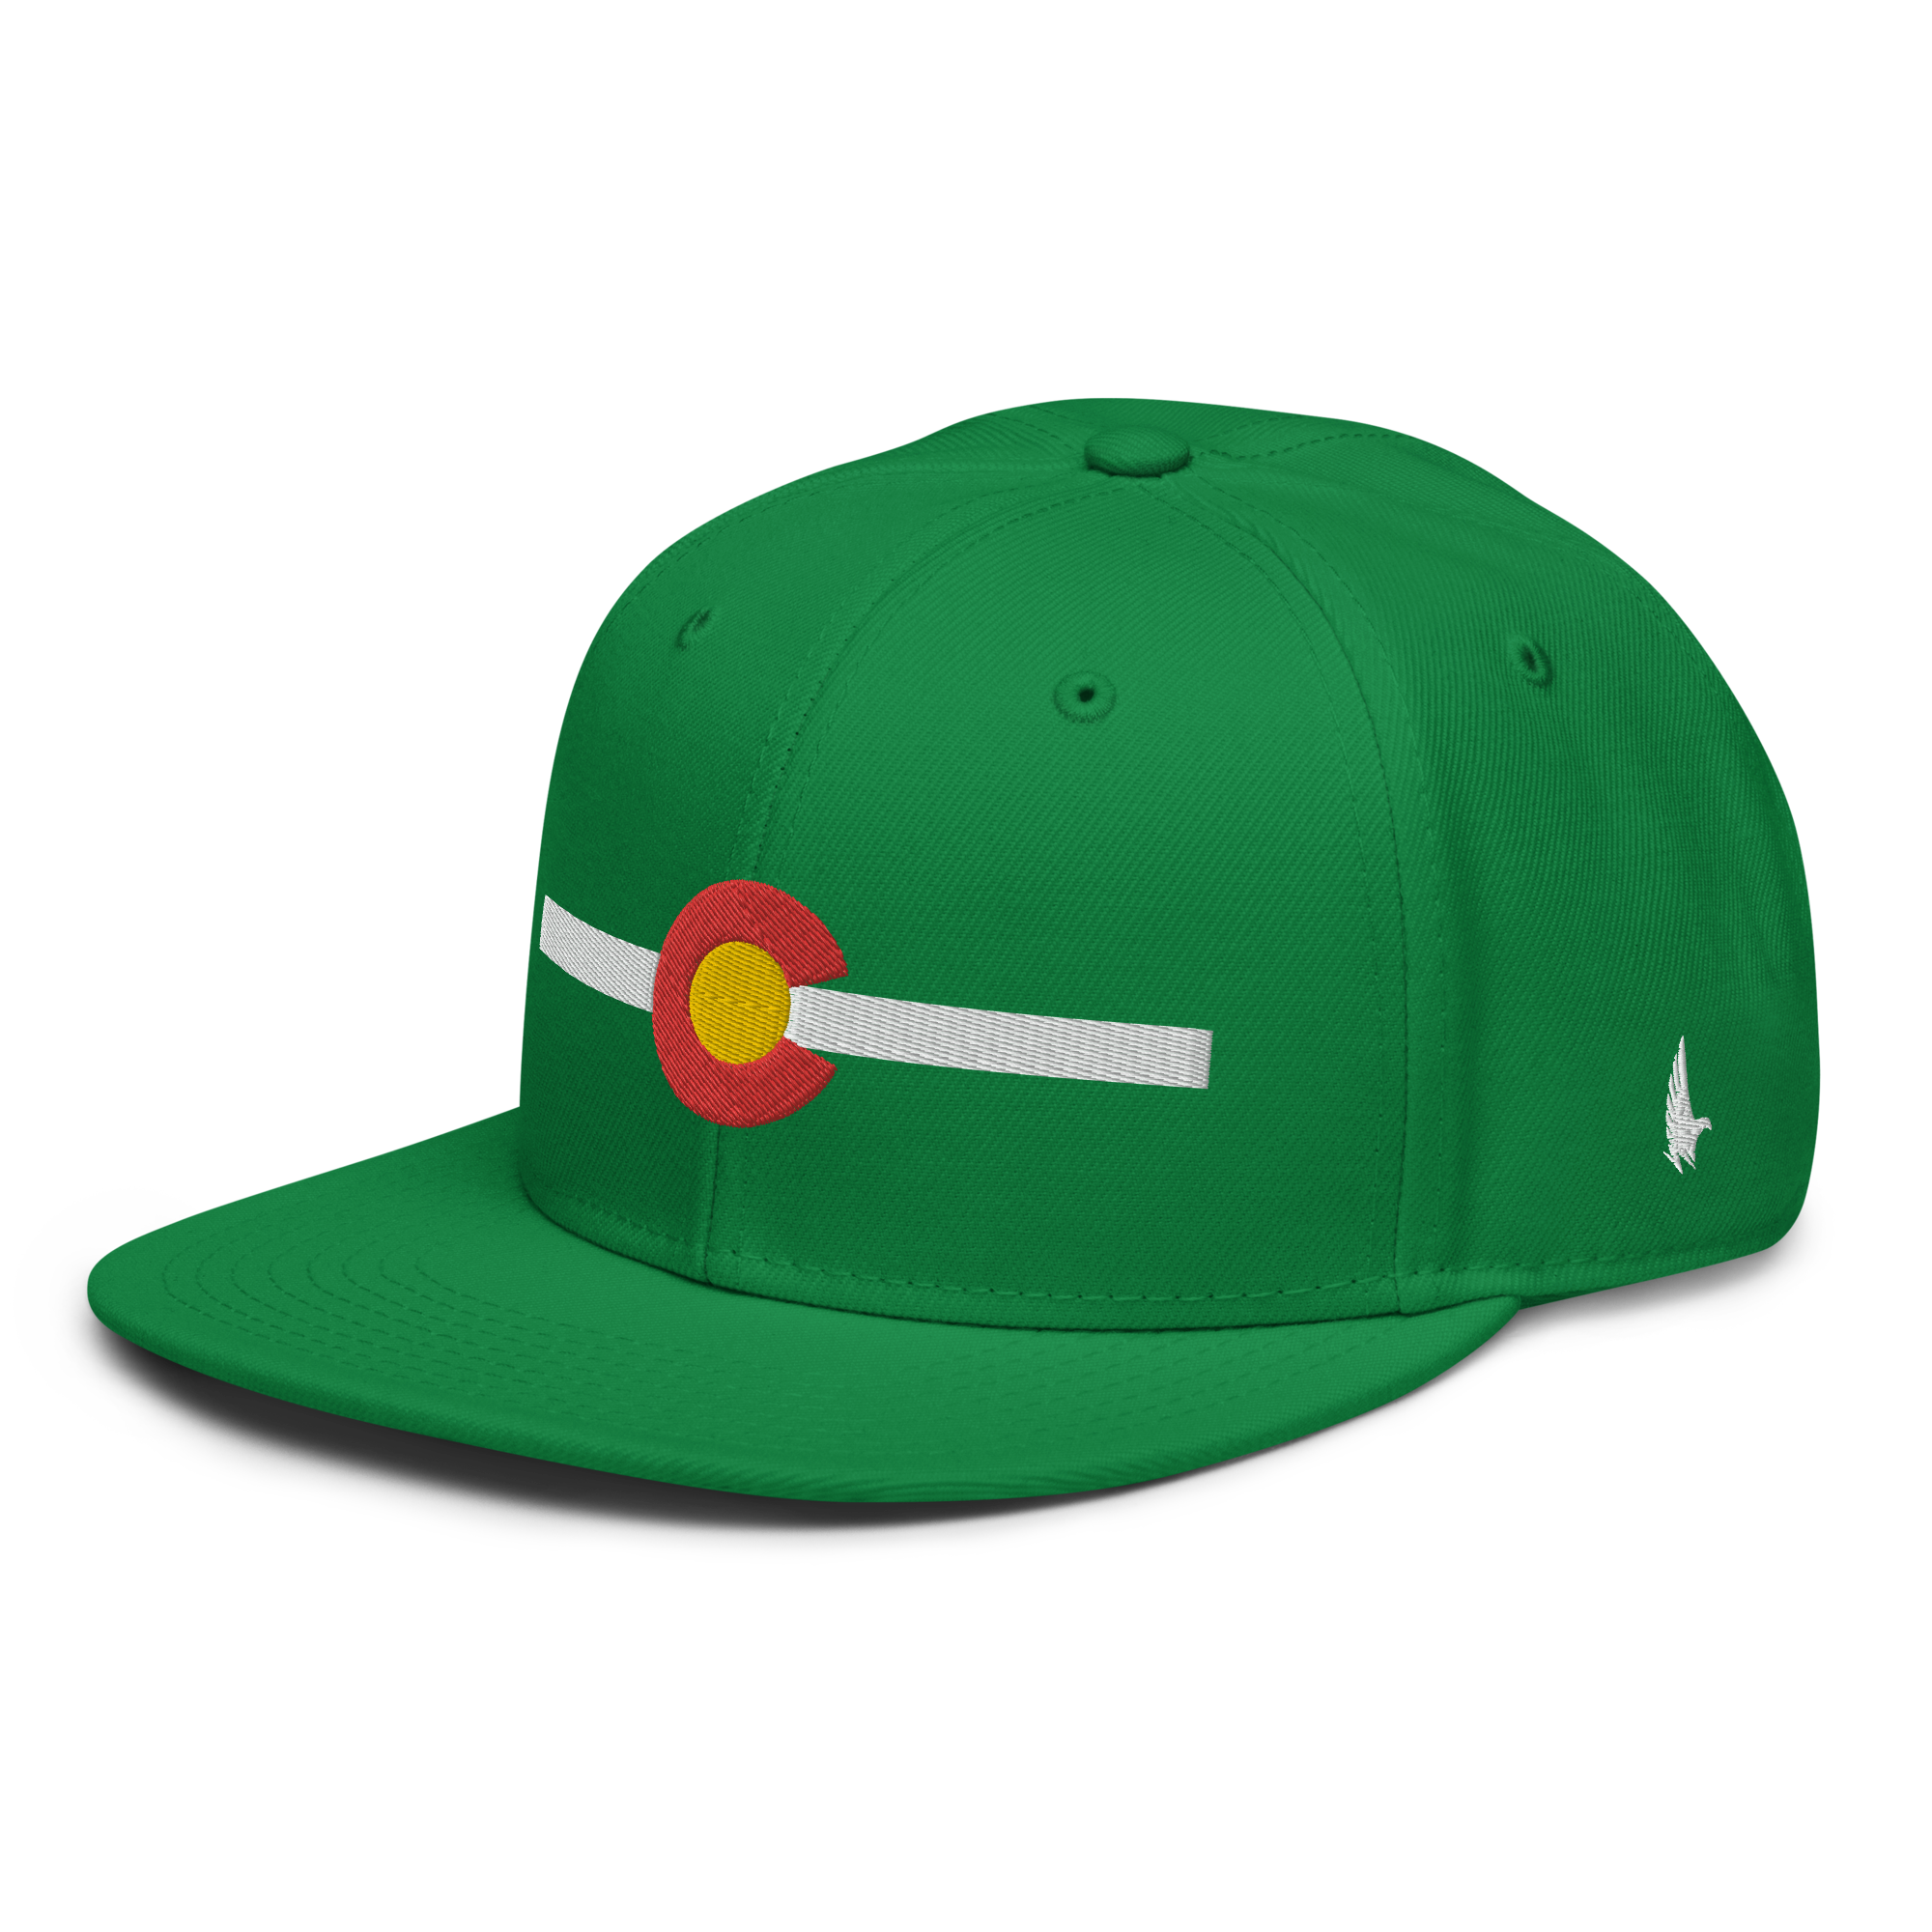 Classic Colorado Snapback Hat Green White OS - Loyalty Vibes